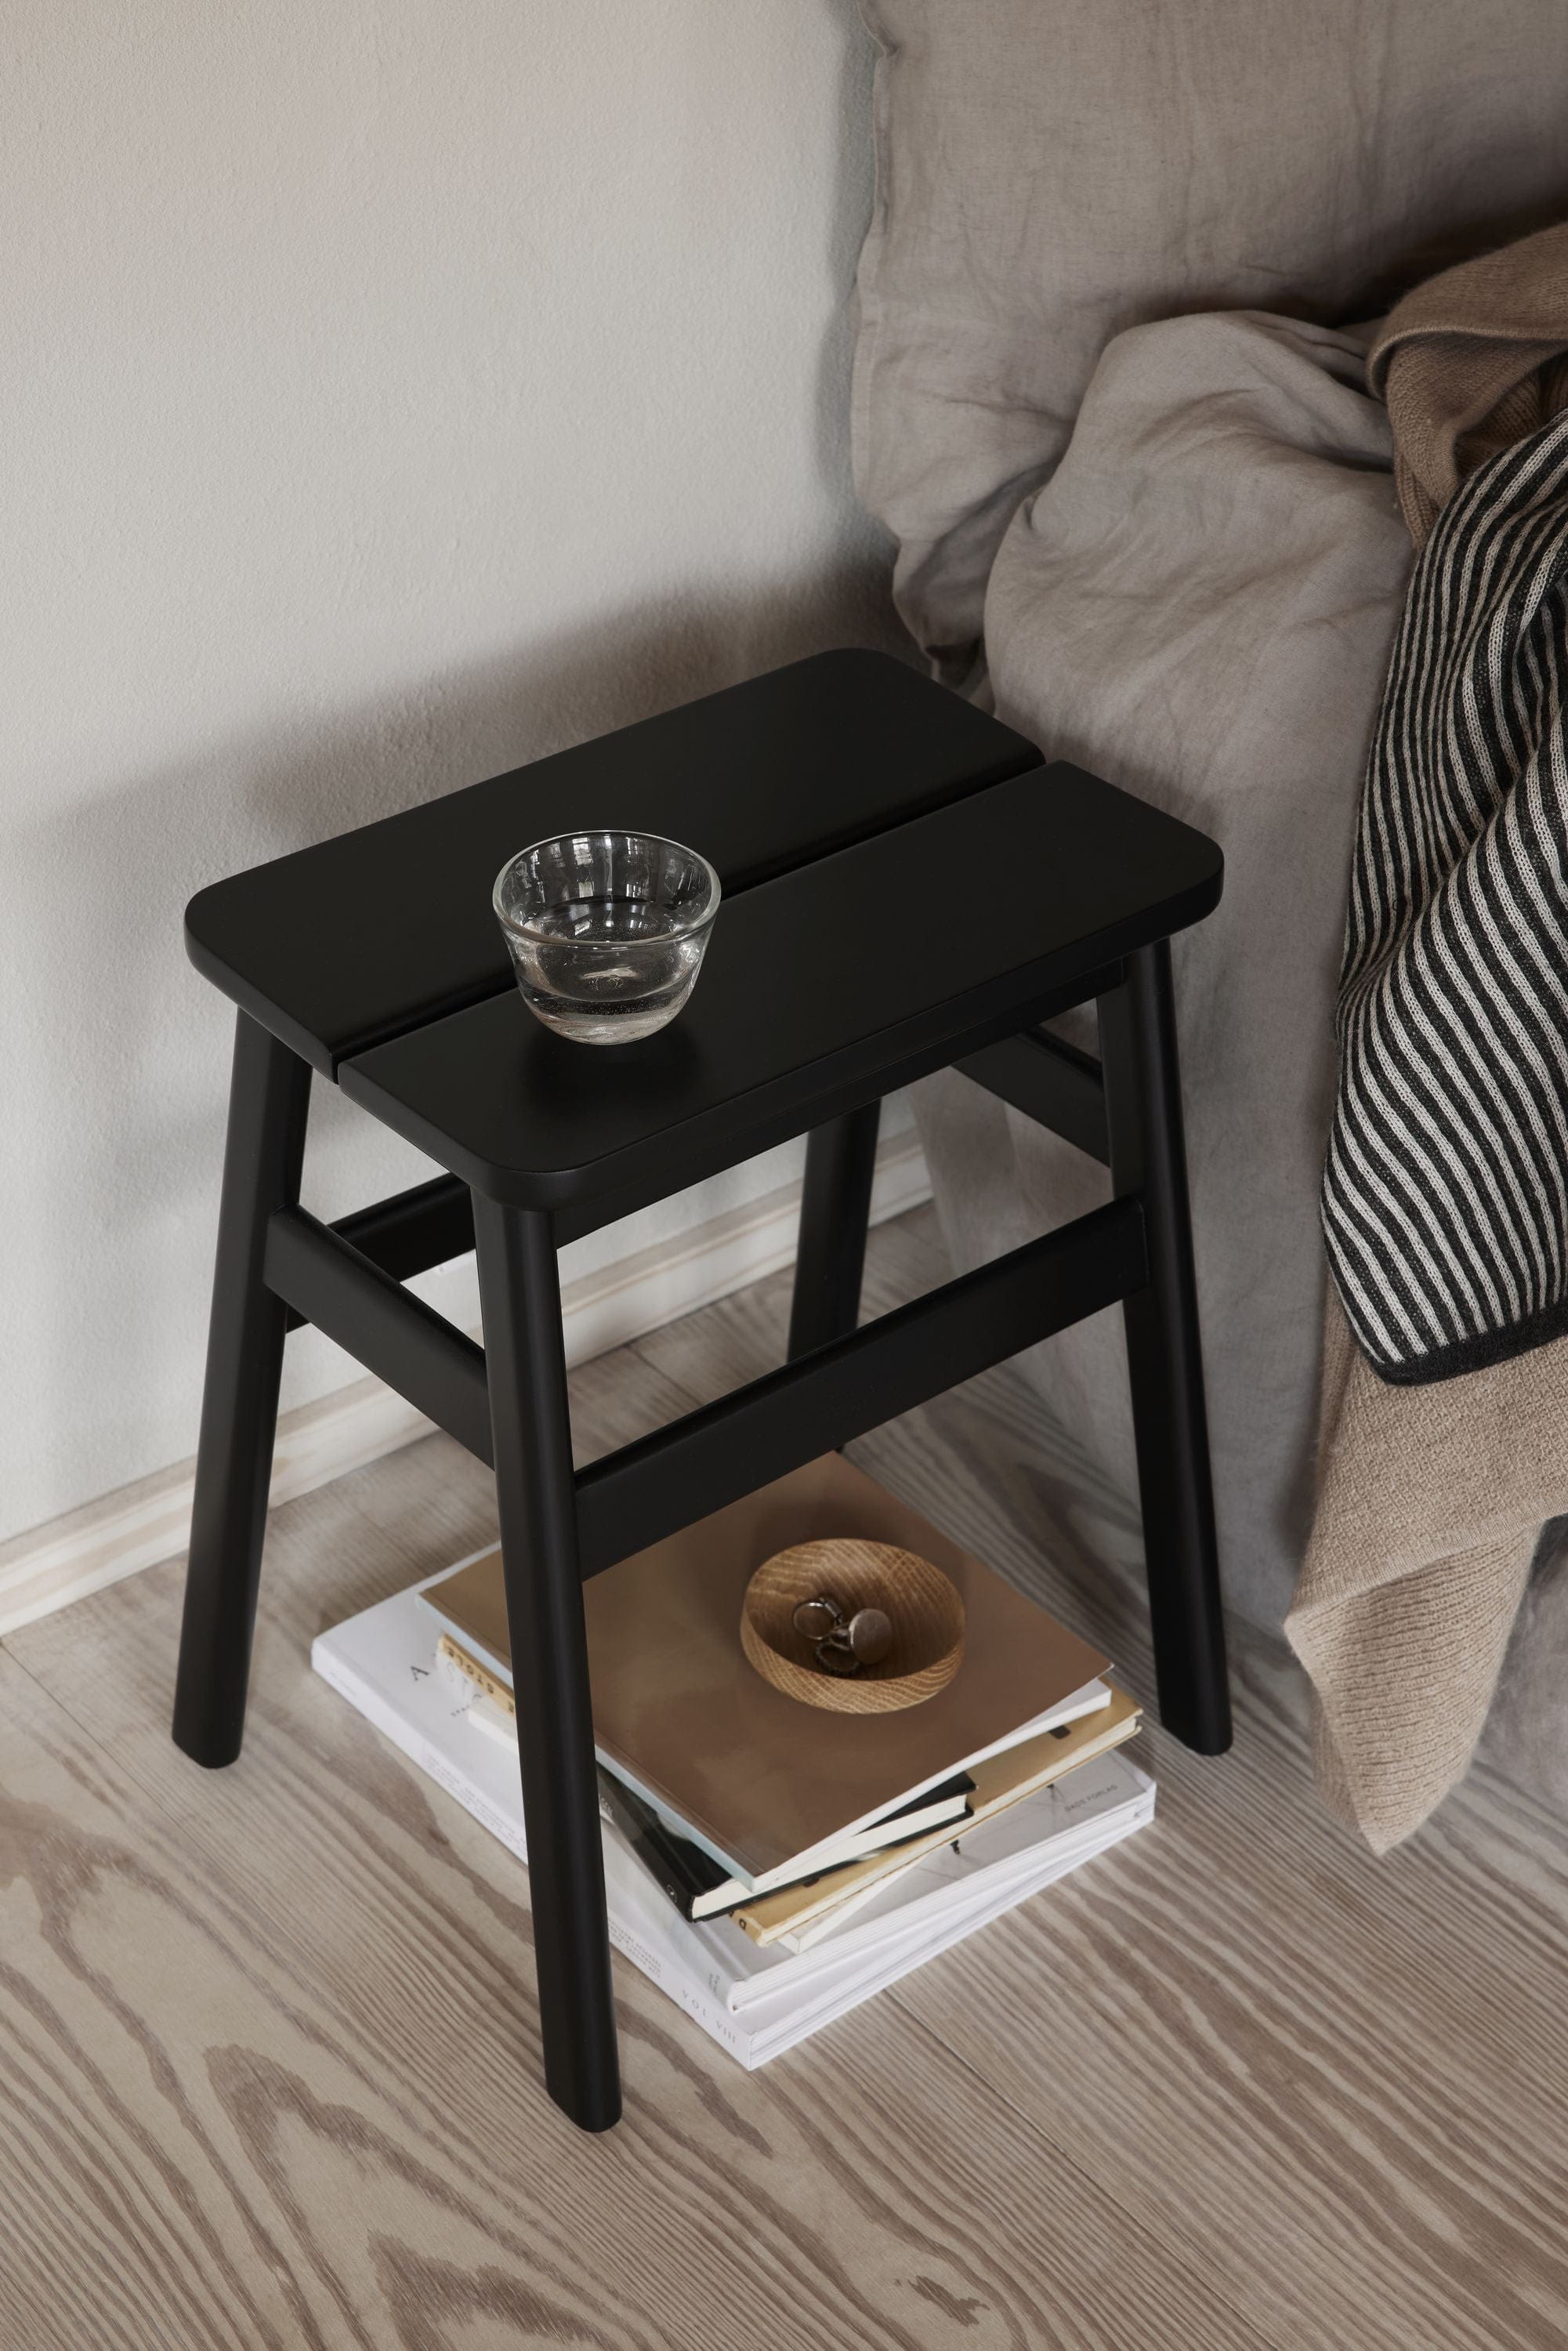 Form & Refine Angle Standard Bar Stool 75 Cm. Black Stained Beech